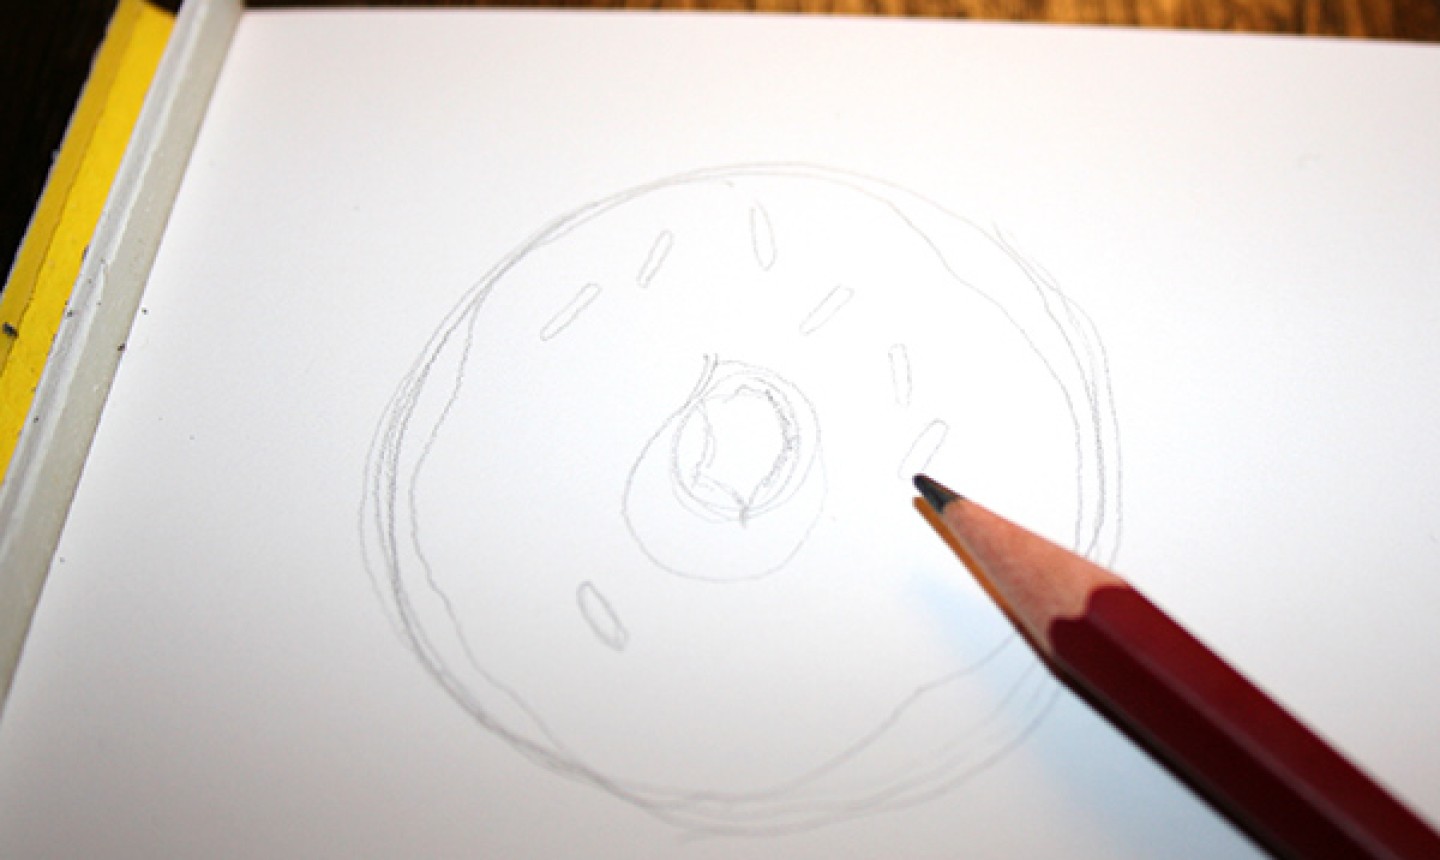 Penciled outline of donut